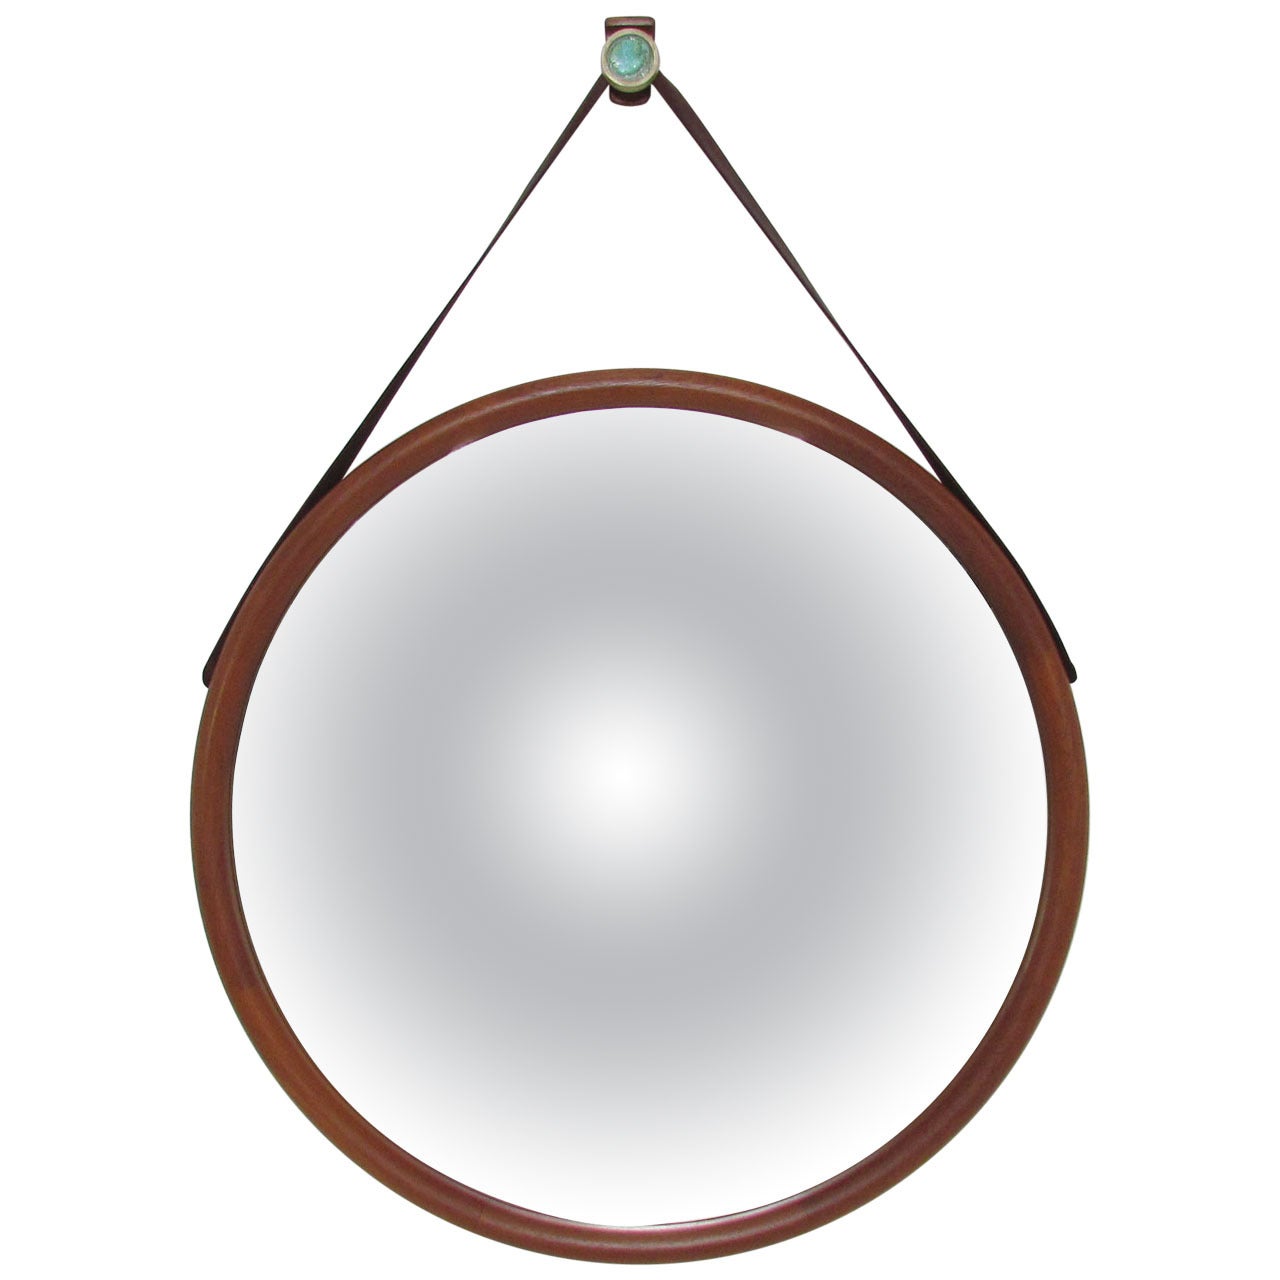 Large Danish Teak Wall Mirror with Leather Strap and Tile Hook